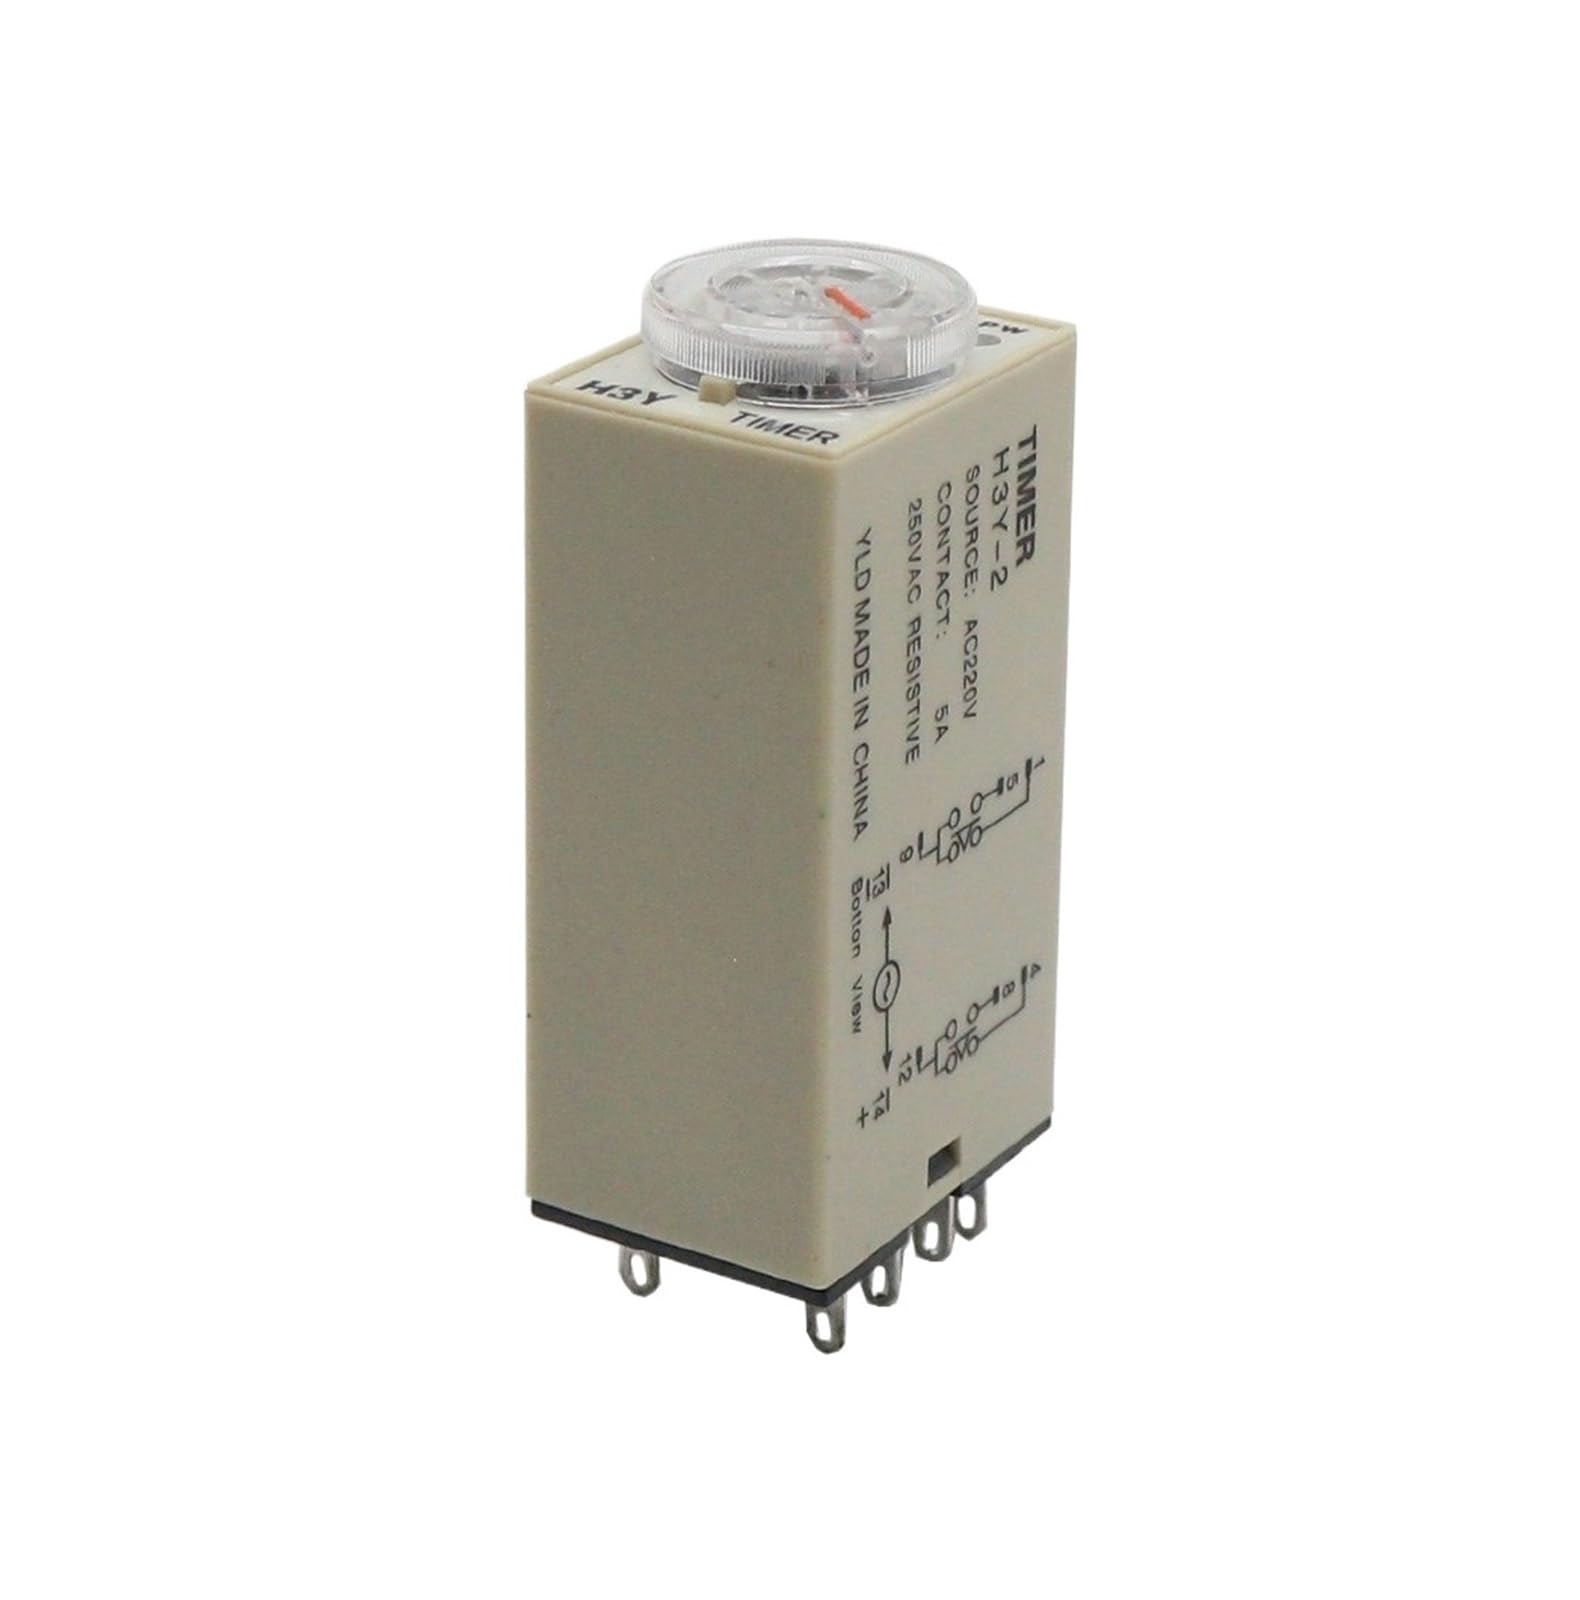 1pcs Power on Delay Time Relay H3Y-2 Small 8-pinDC12V24vAC220v Timer Switch 1S 3S 5S 30S 60S 5M 10M 30M 60M NWPNLXEA(DC 12V,H3Y-2 30Minute) von NWPNLXEA